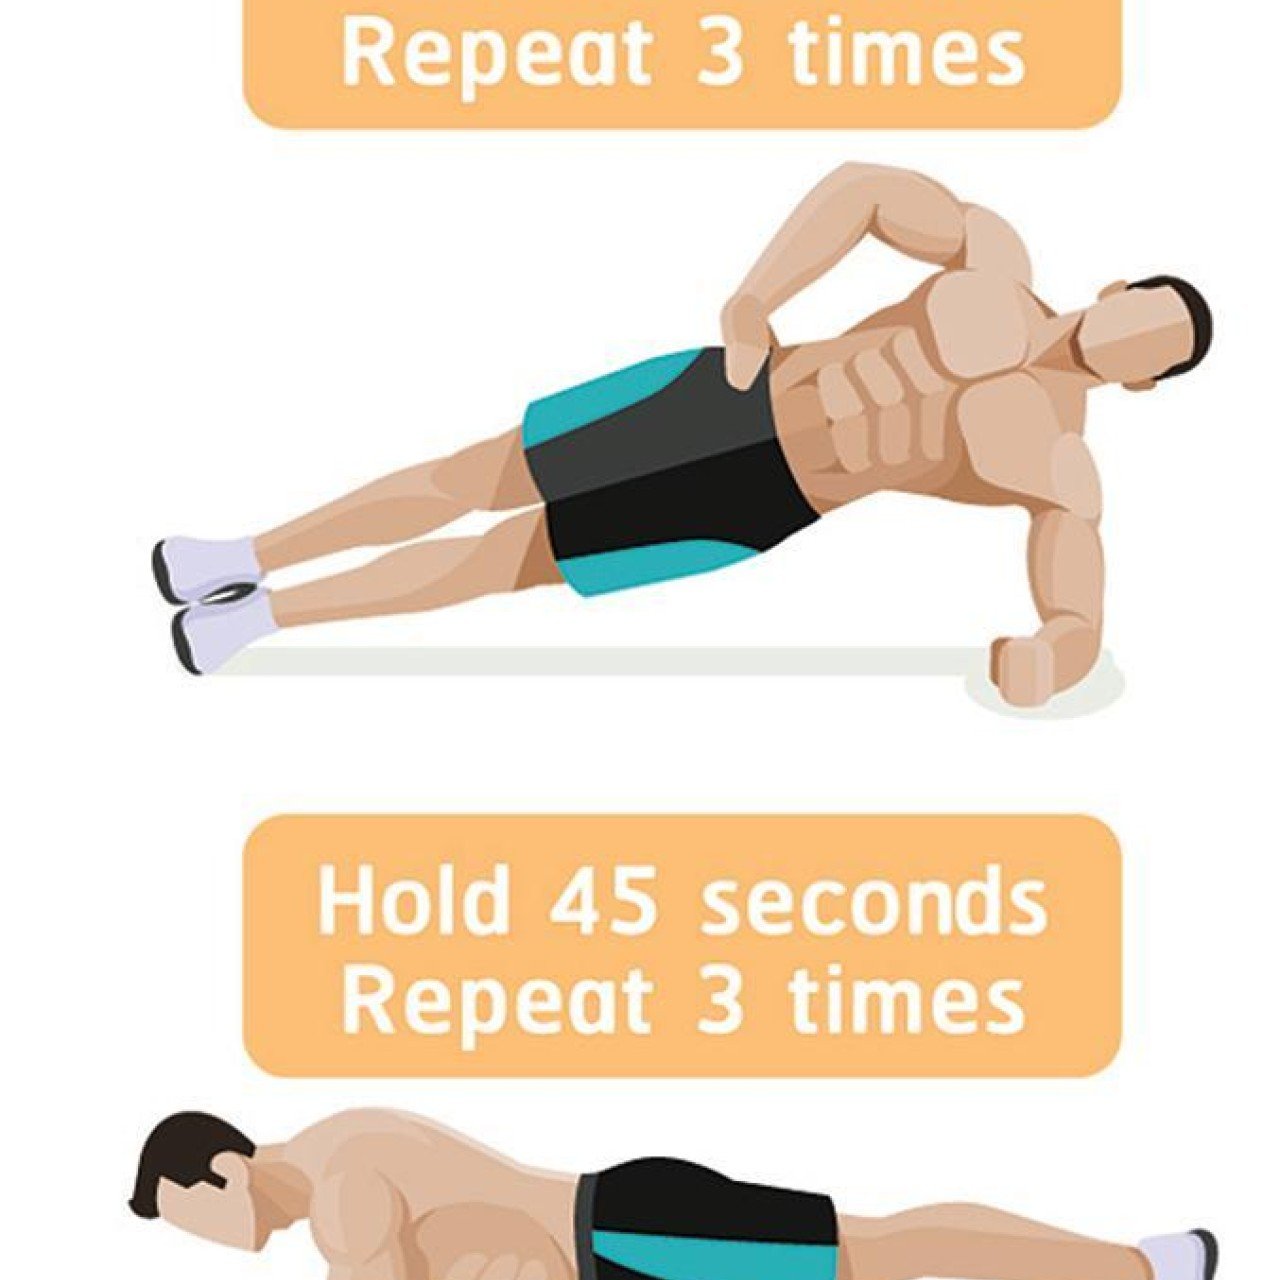 How to Work Out at Home: Great Beginner Exercises